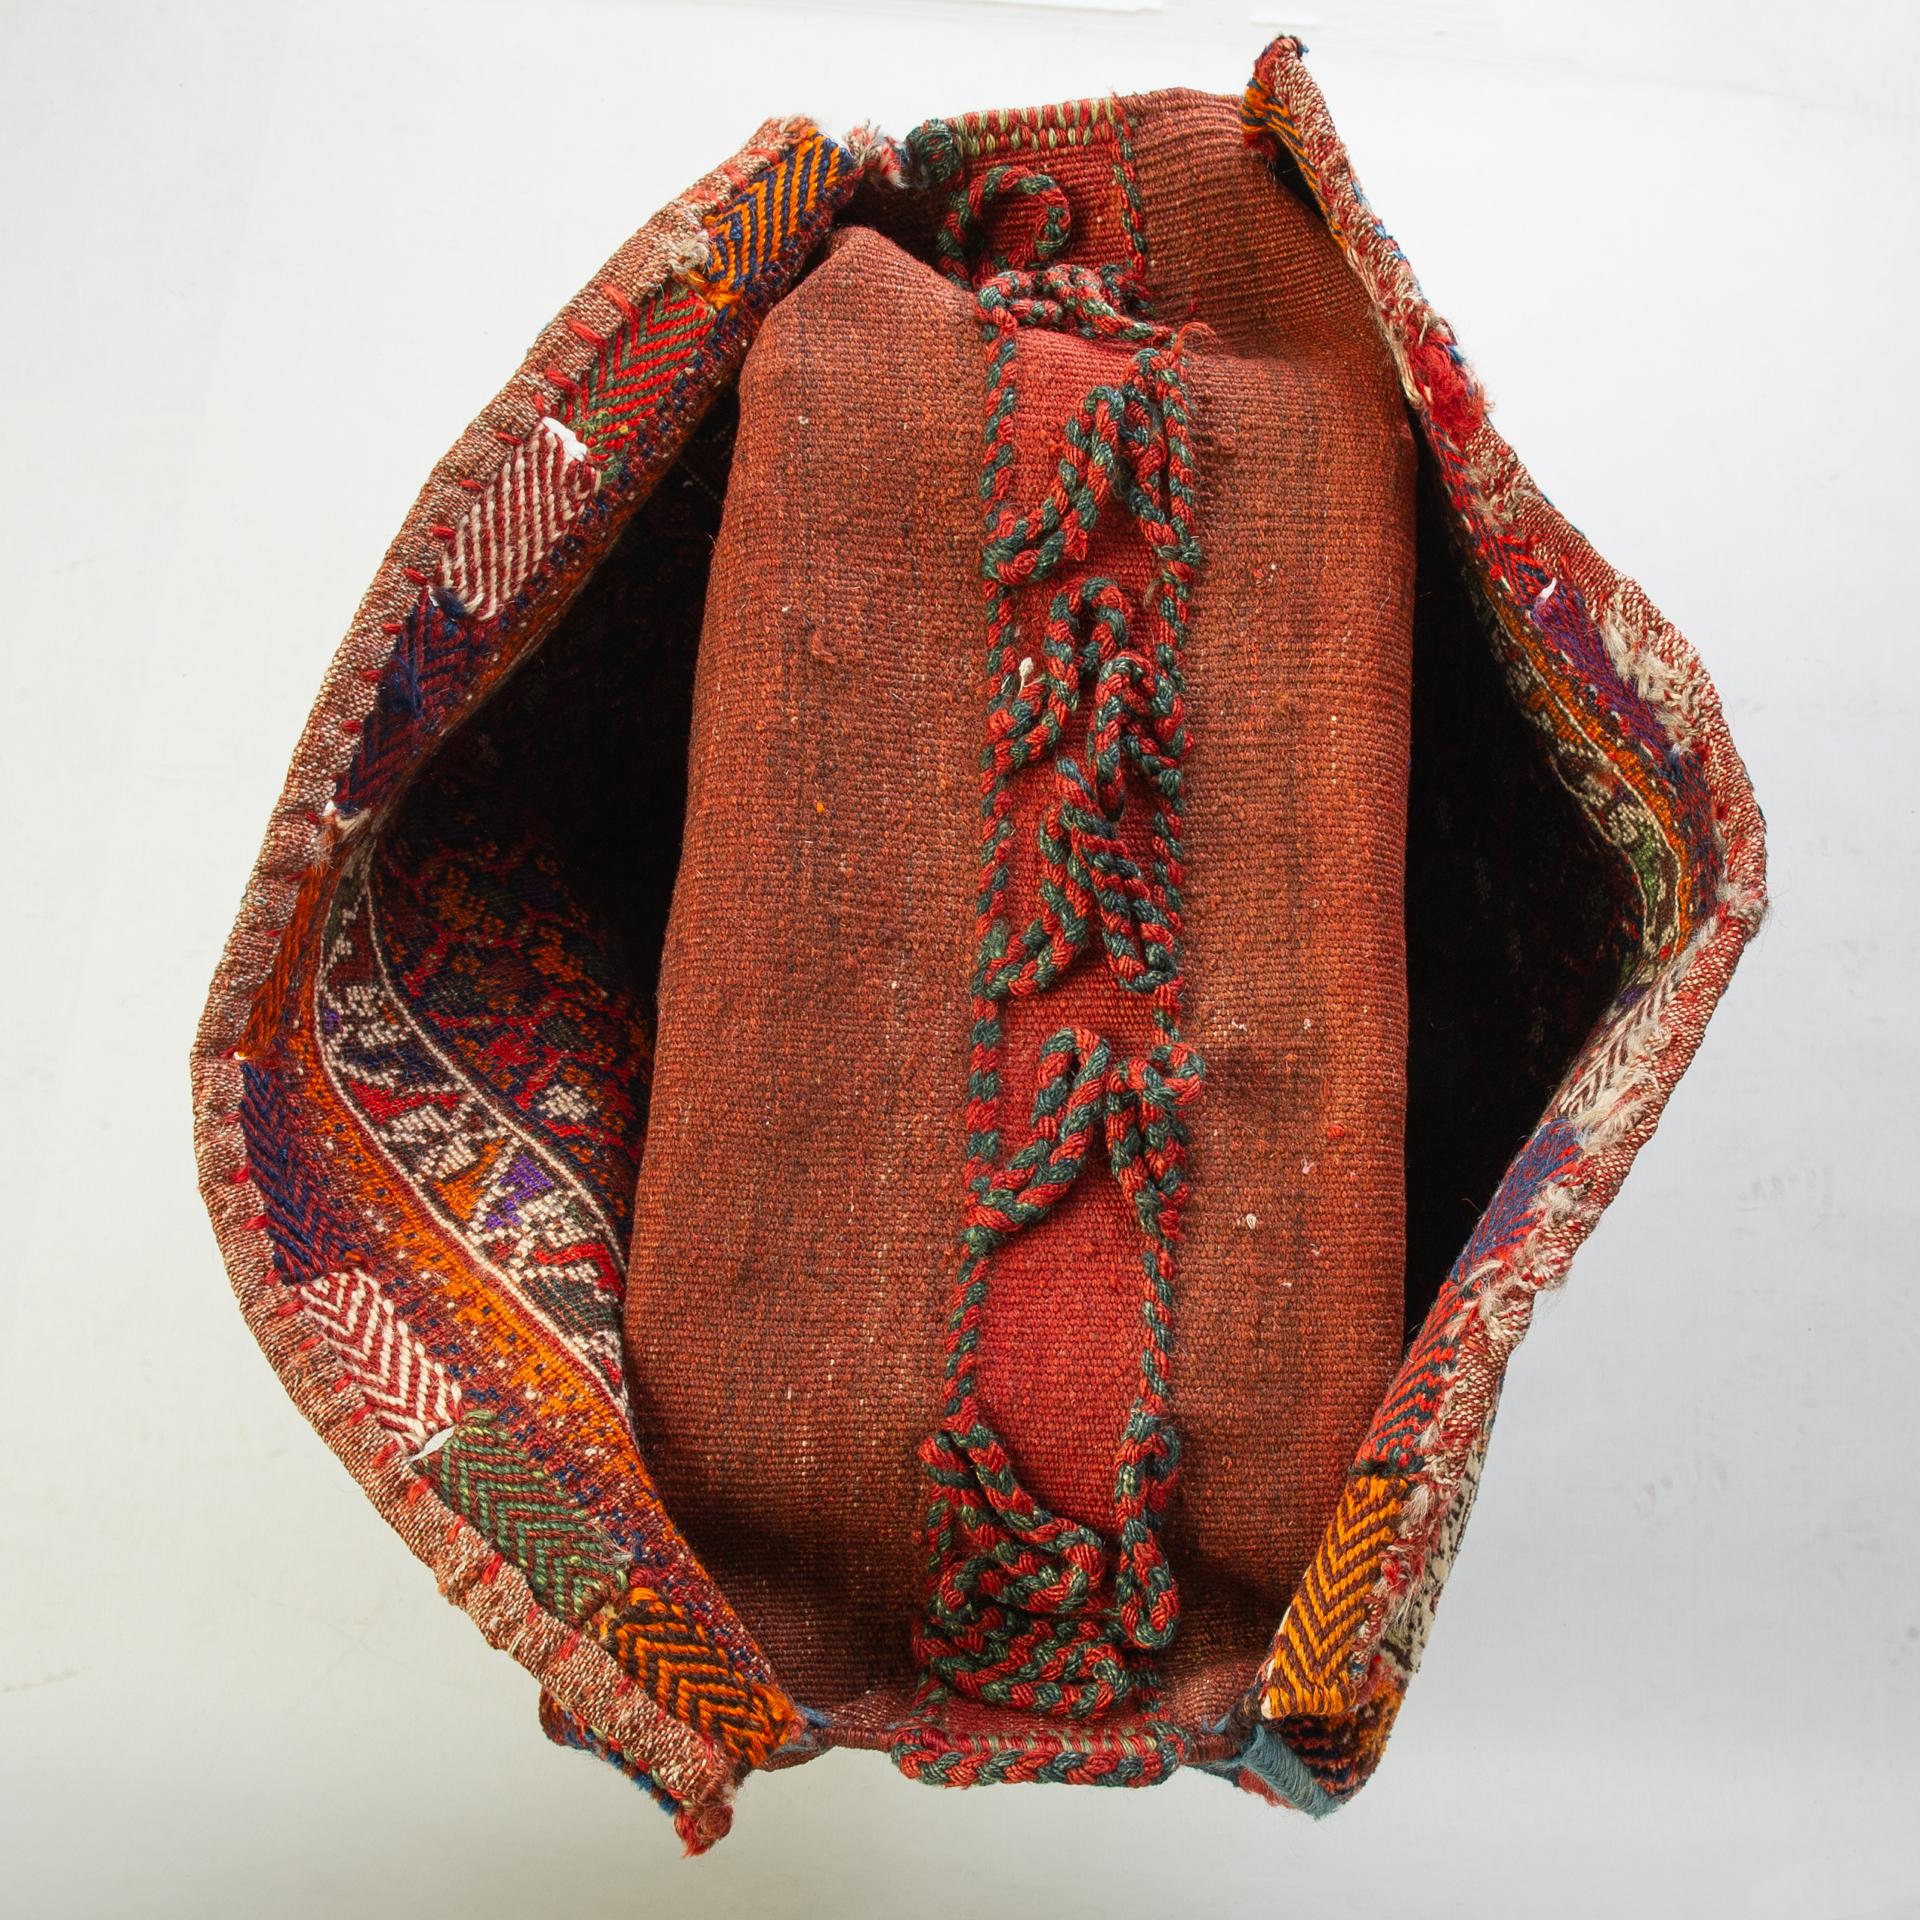 Double saddle bag, loom wooven with wool dyed with vegetable substances.
It can be hung on the wall or placed on an easel and serve as a newspaper holder;
with two pillows it becomes a seat with backrest.
(its price is interesting because I want to